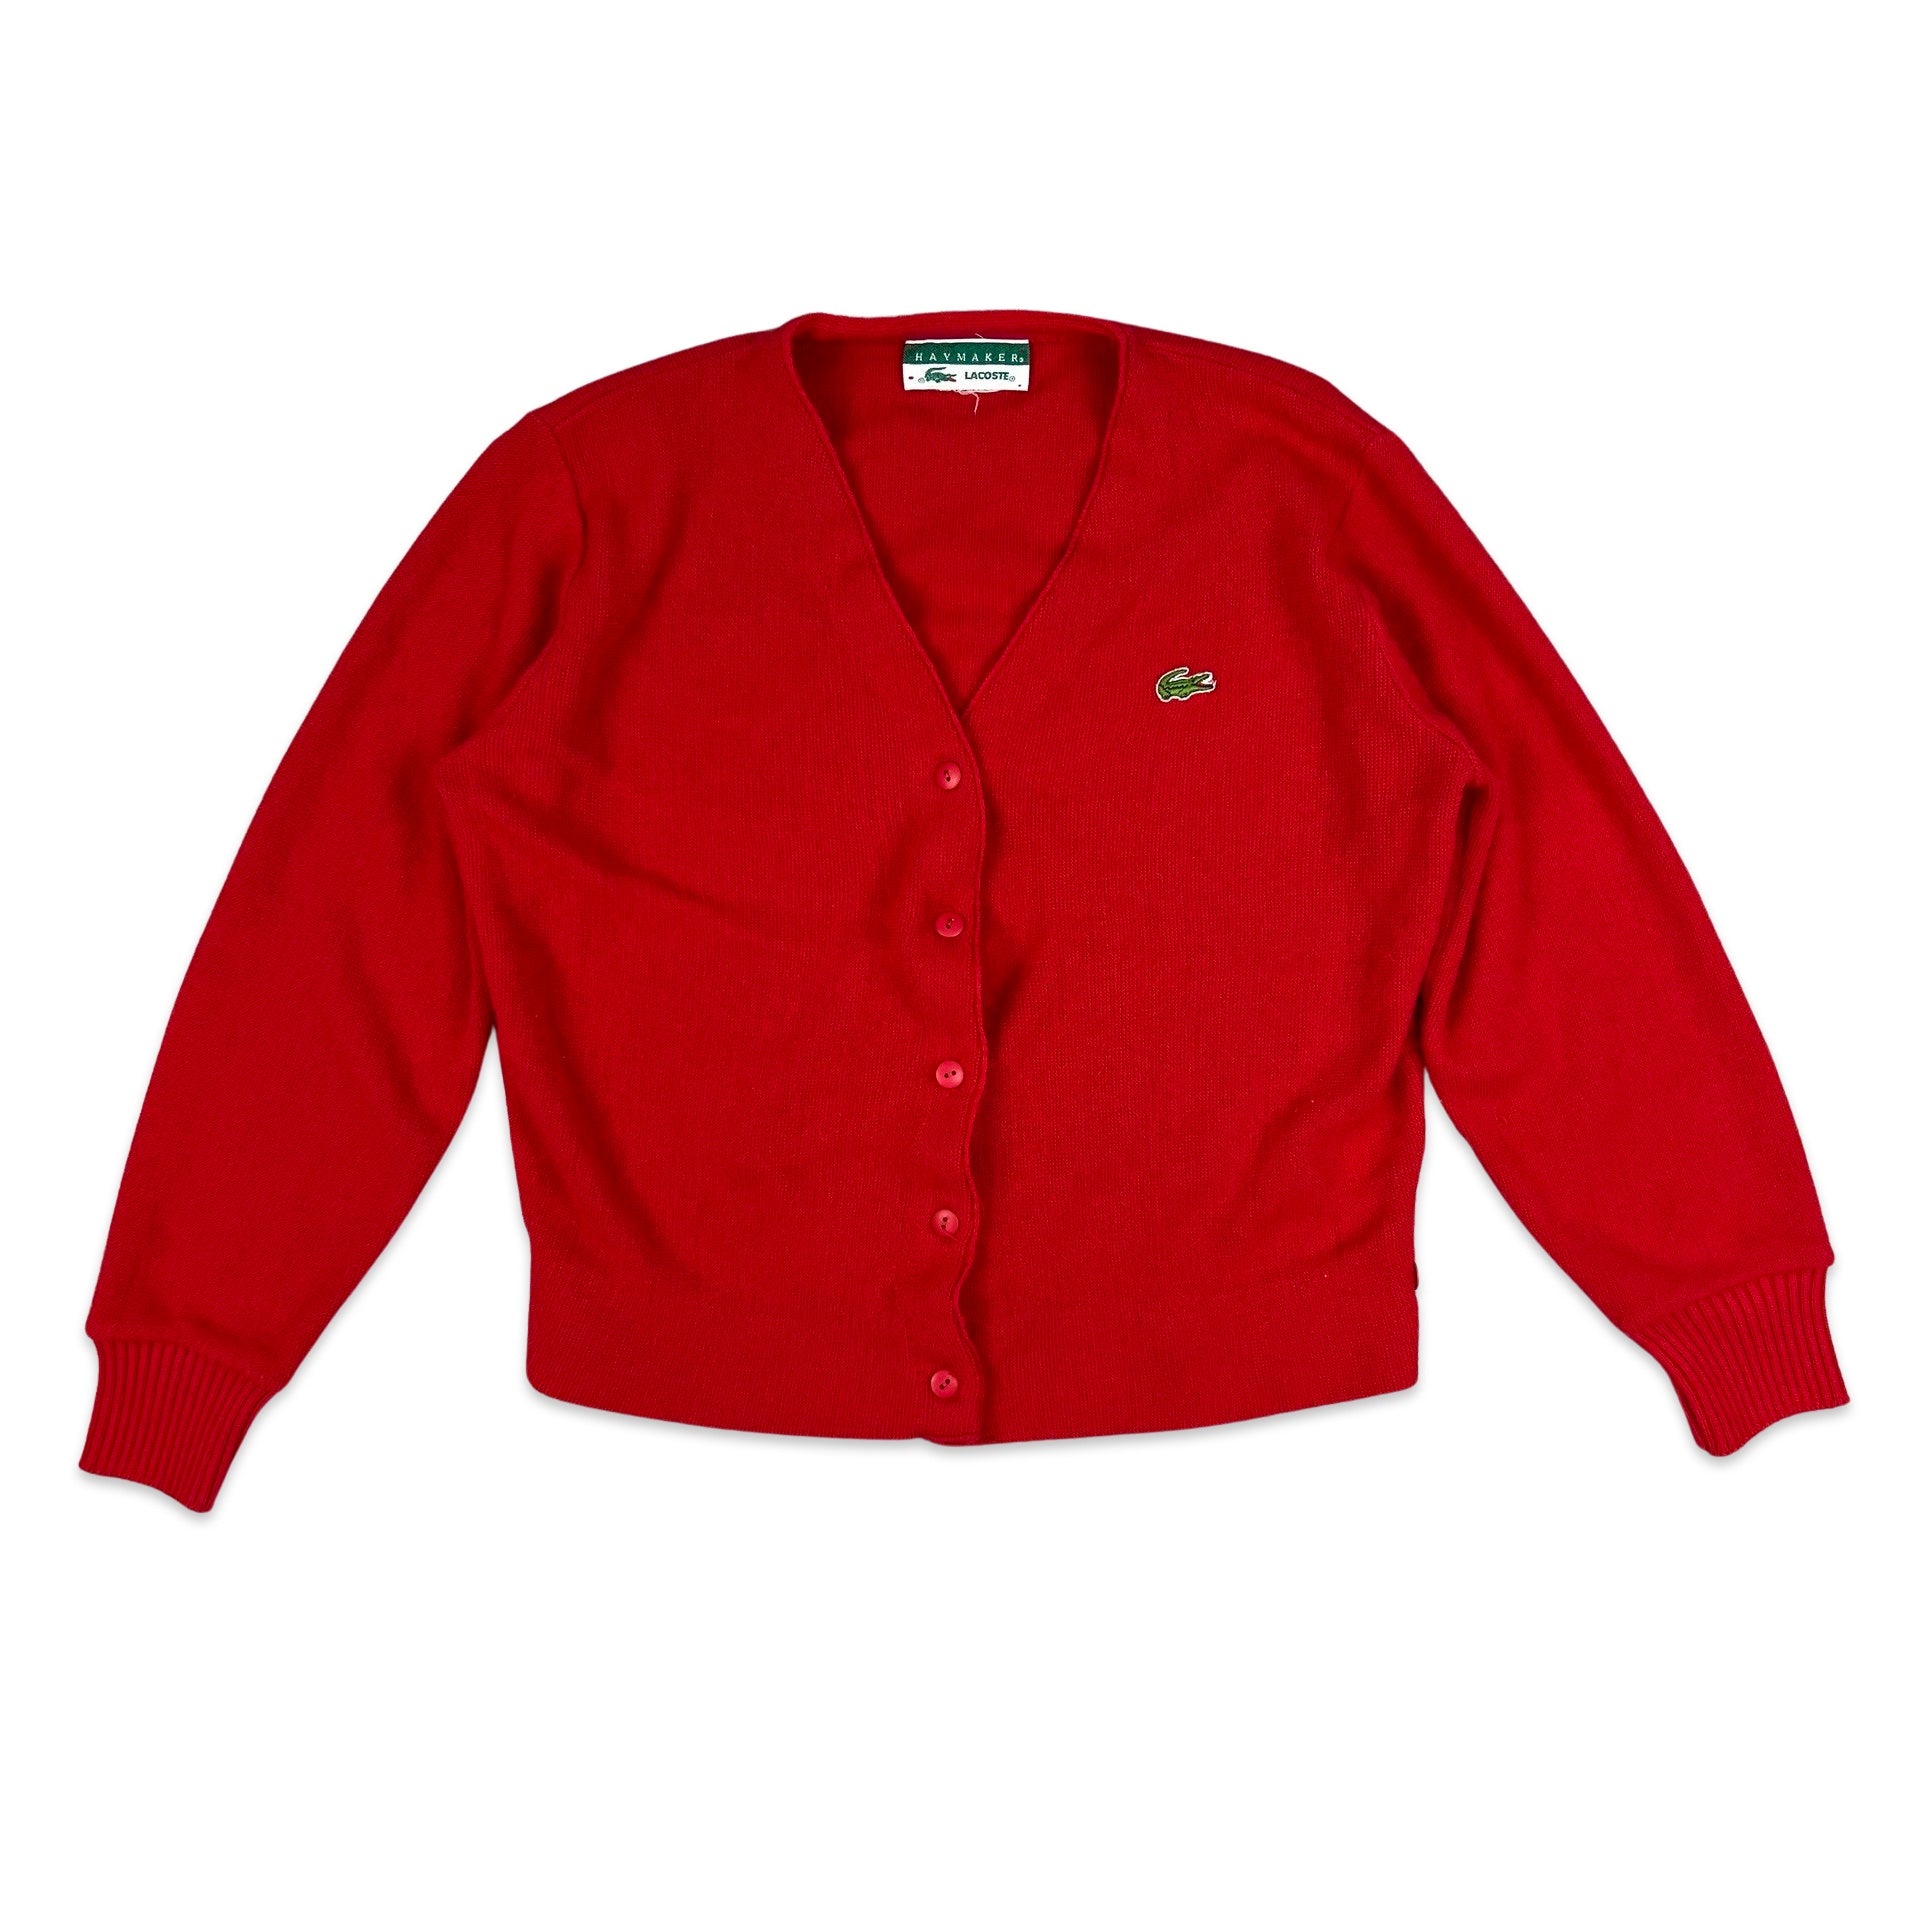 80s Vintage Lacoste Knit Cardigan Red 10 12 14